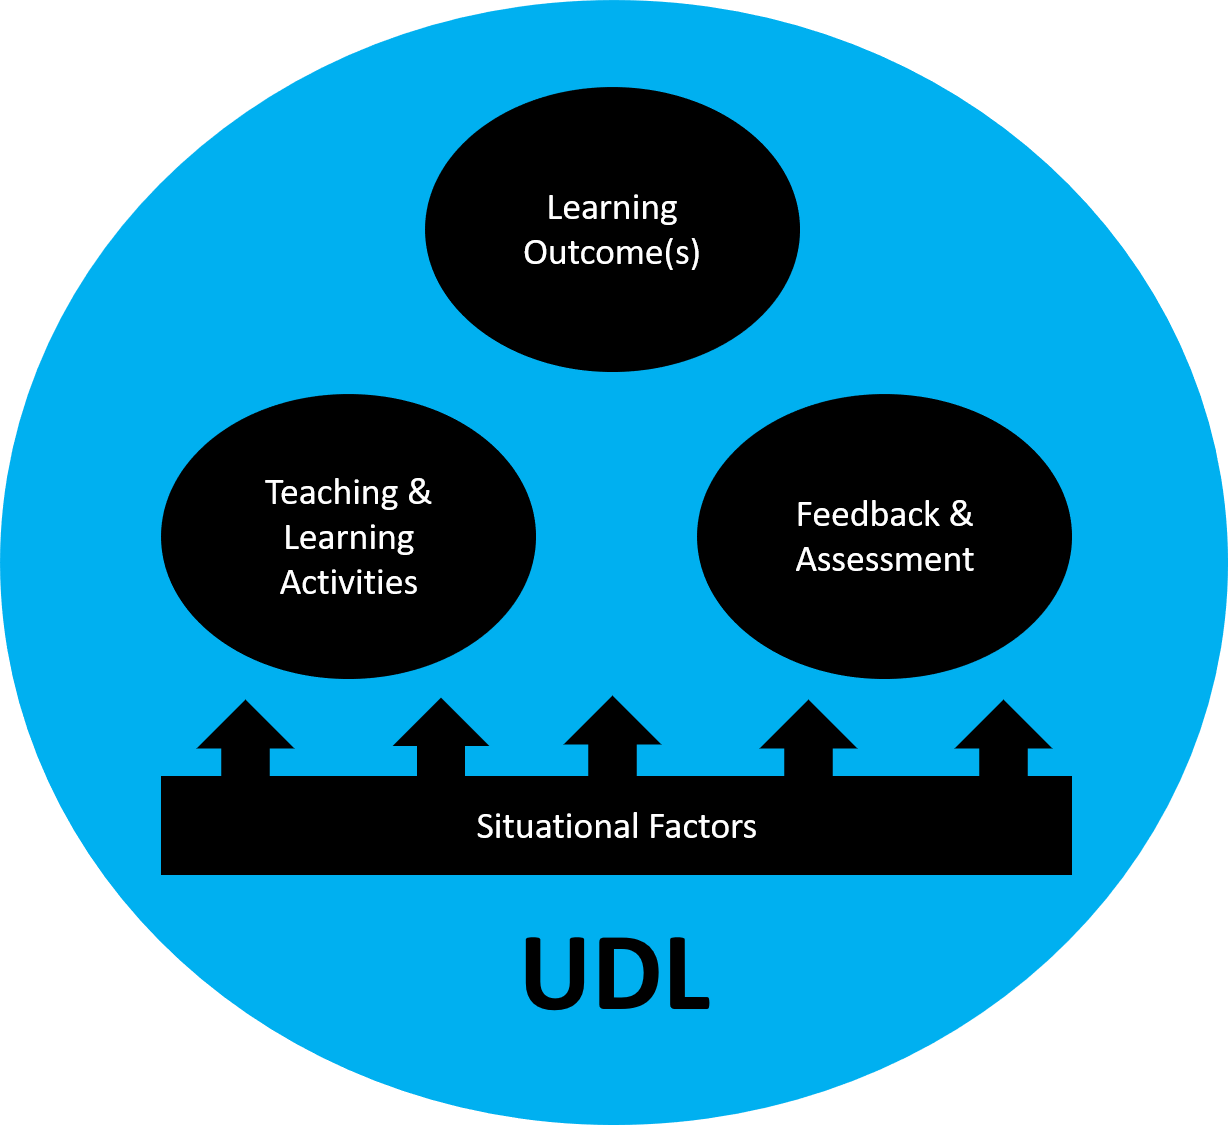 Learning Outcomes, Teaching and Learning Activities, and feedback and assessment are all linked, and all are informed by situational factors. Underpinning it all is Universal Design for Learning, or UDL.